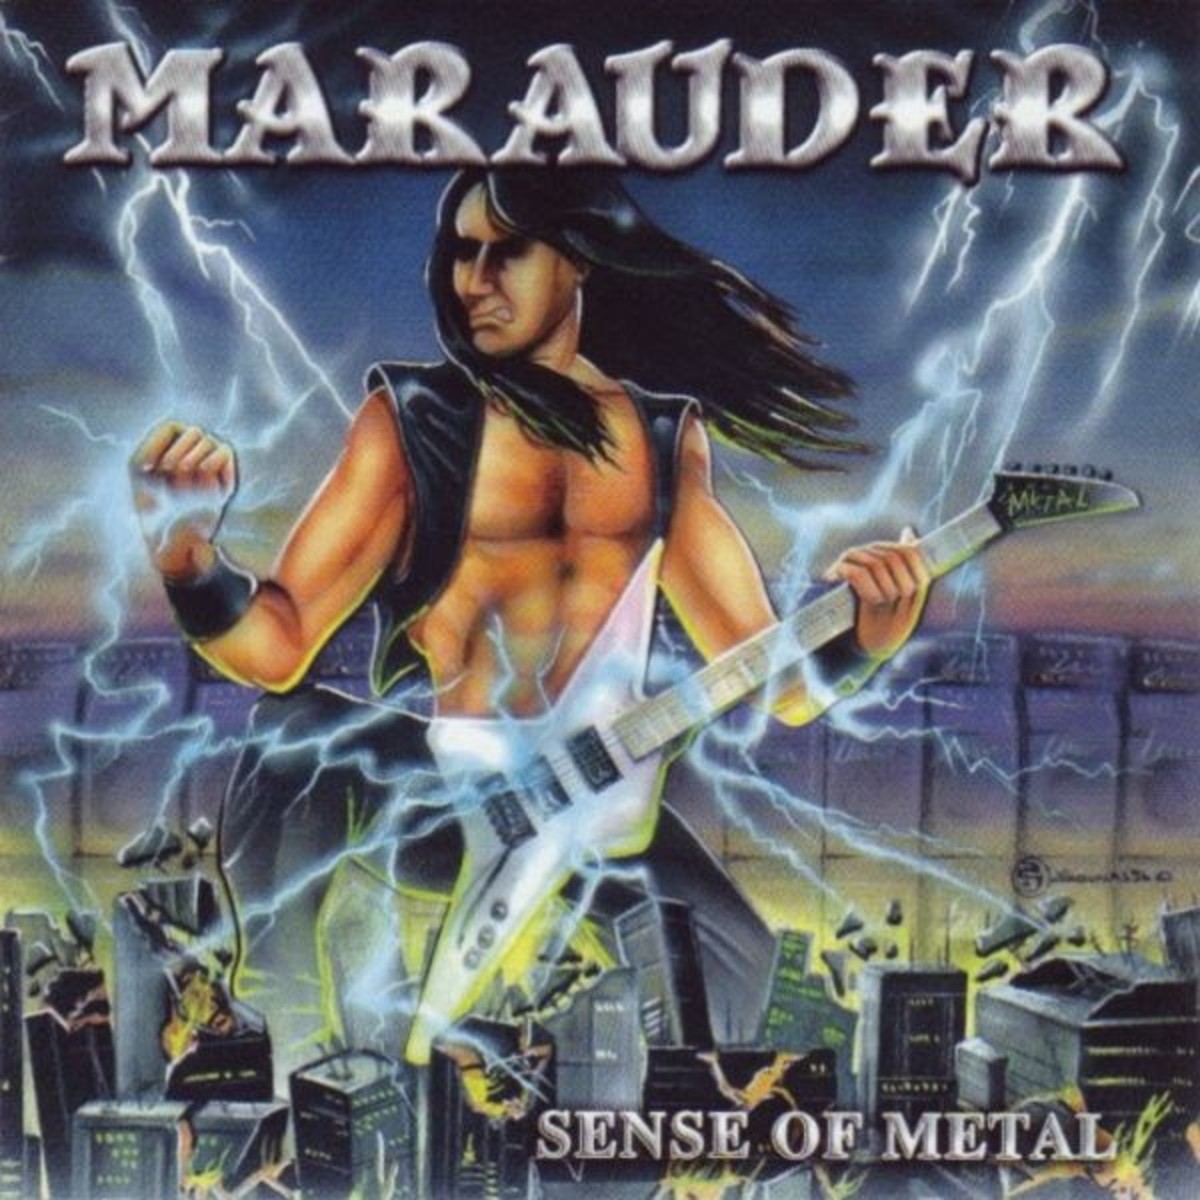 Marauder, SENSE OF METAL -released in 1997? It would've already looked horribly dated in 1987!!